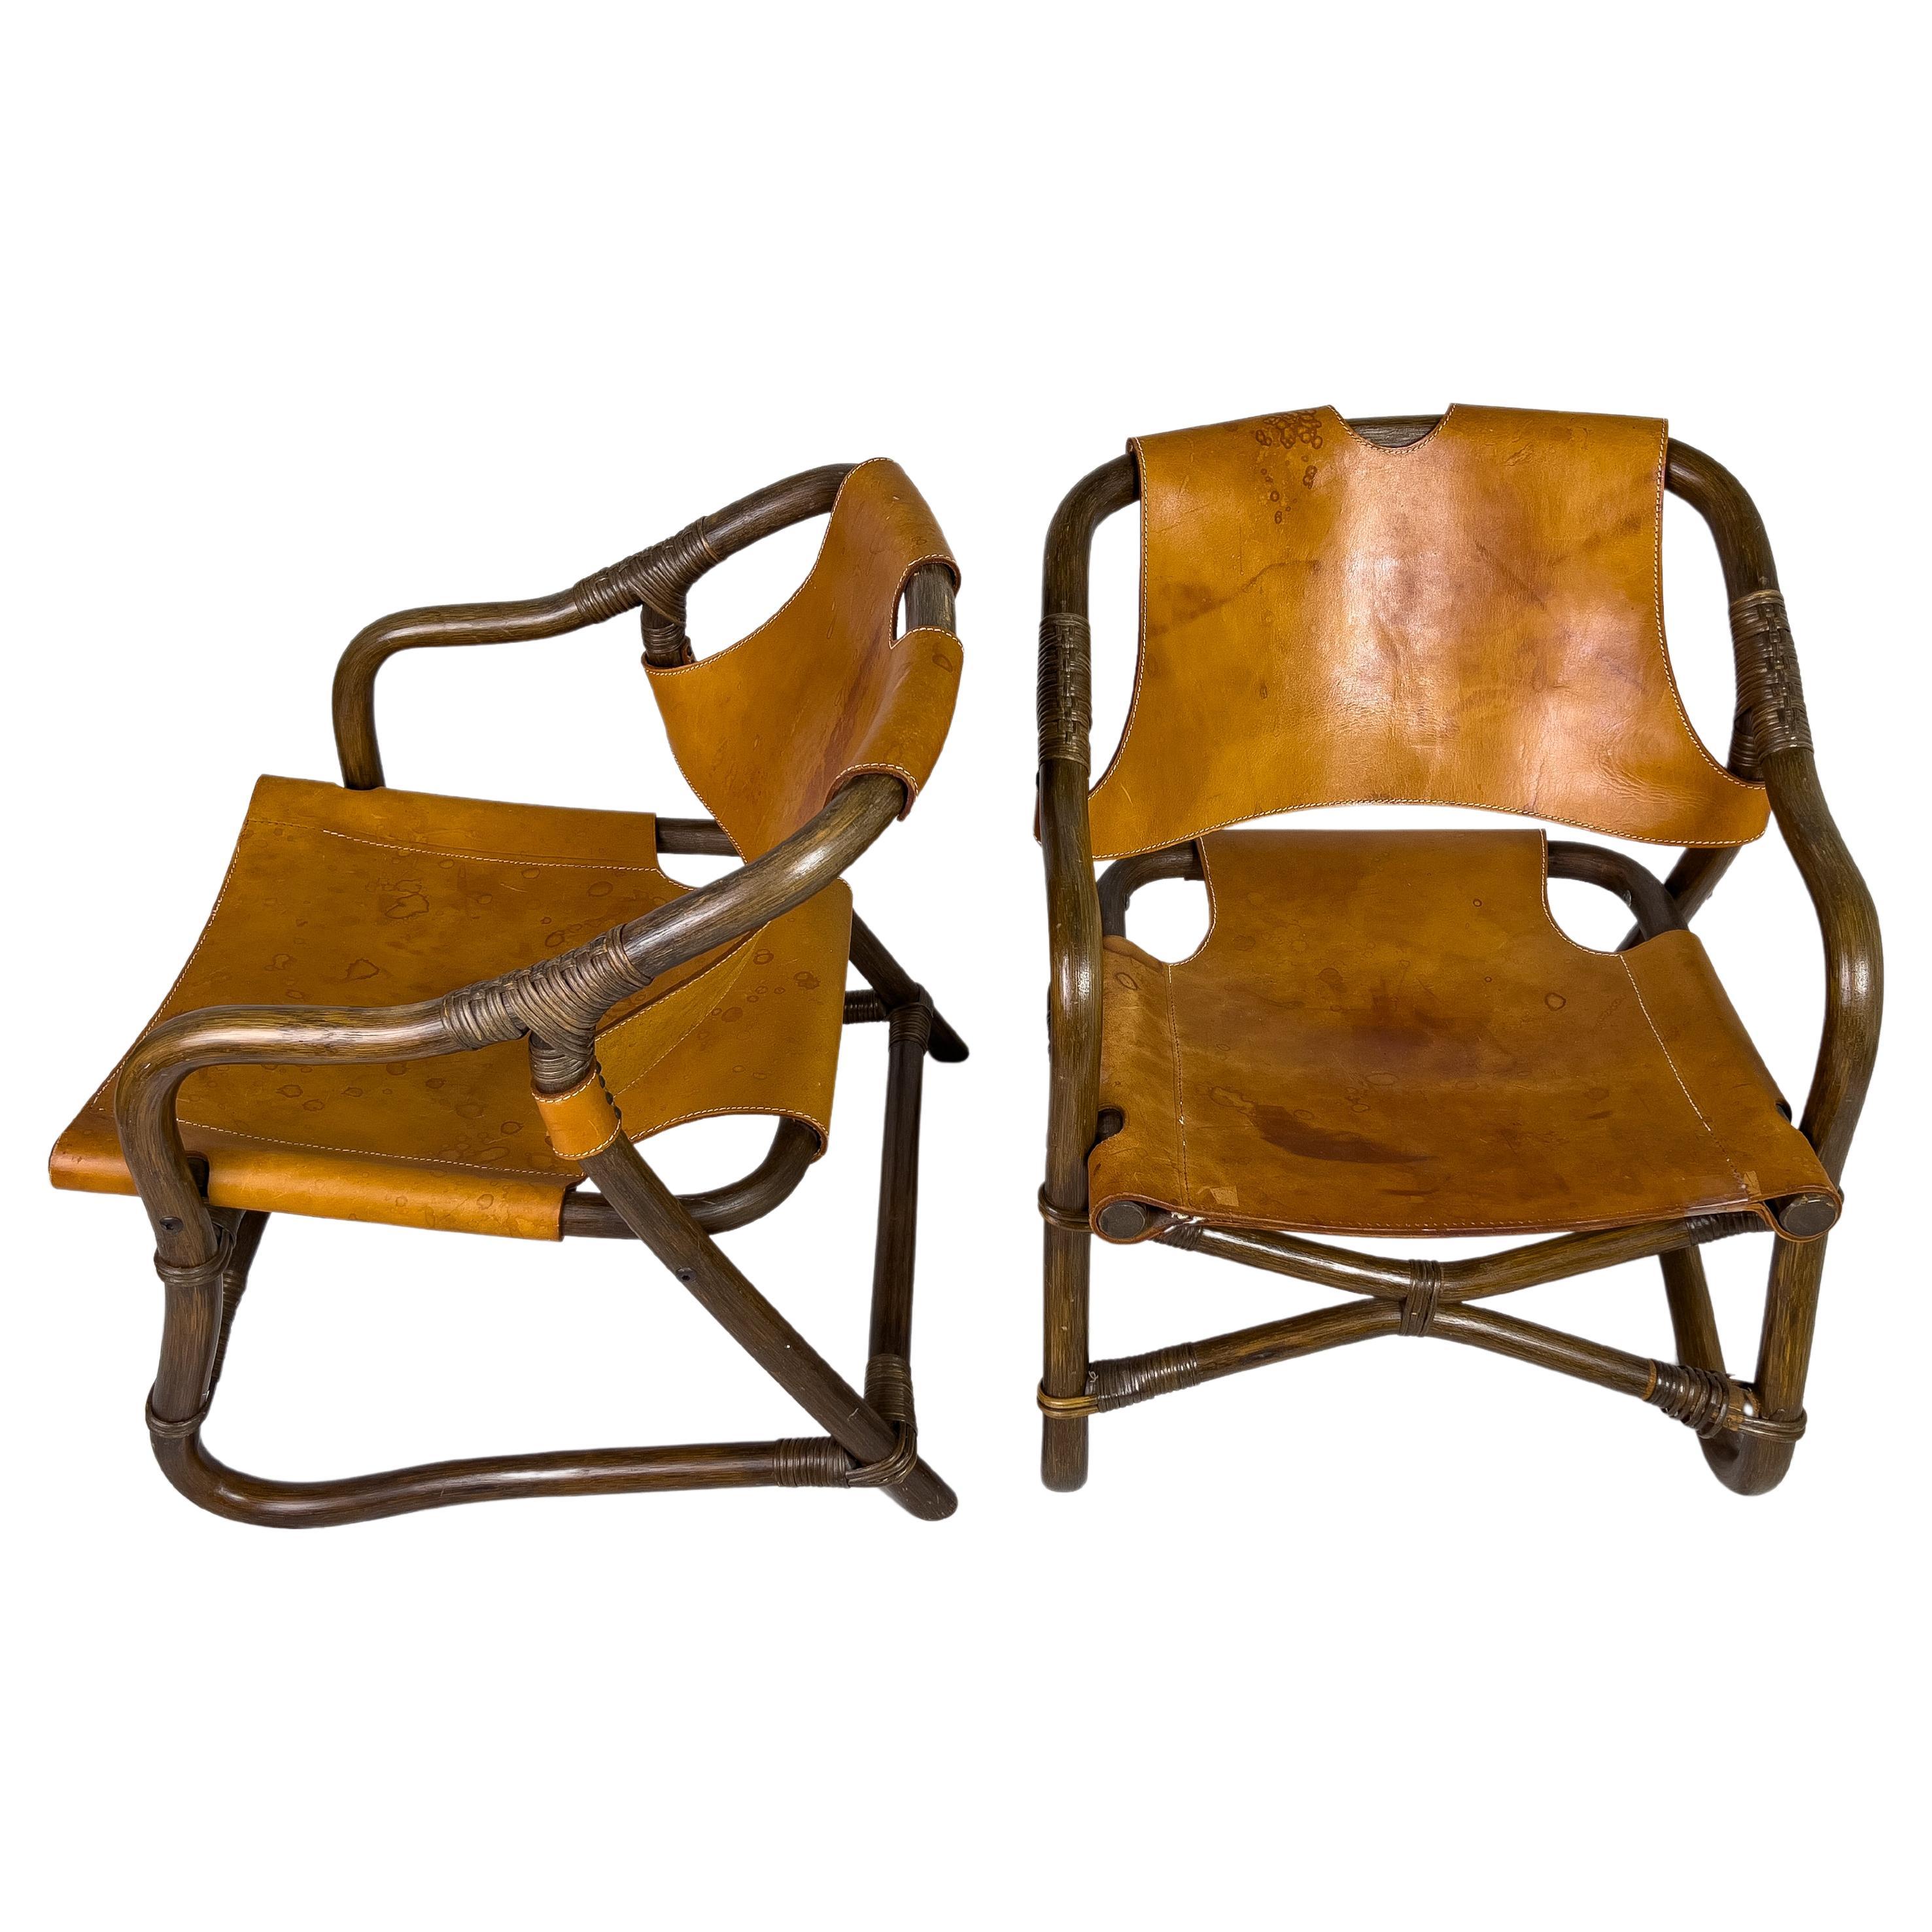 Pair of Midcentury Rattan and Leather Chairs